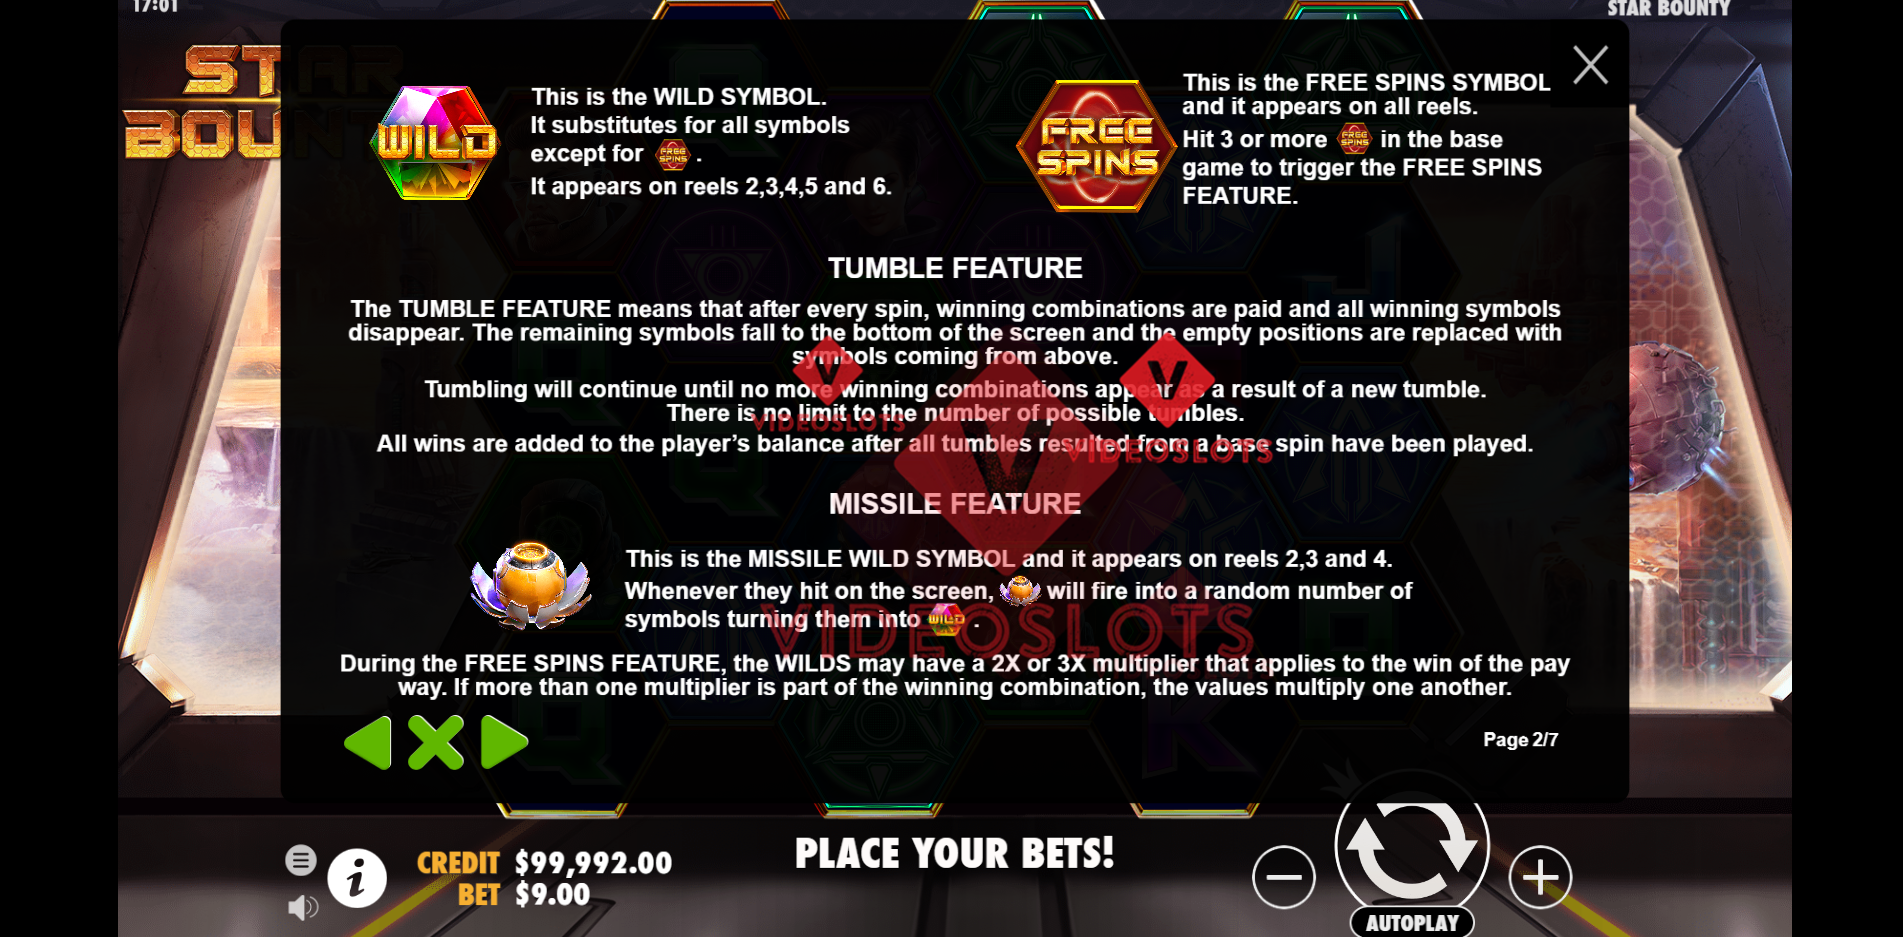 Game Rules for Star Bounty slot by Pragmatic Play